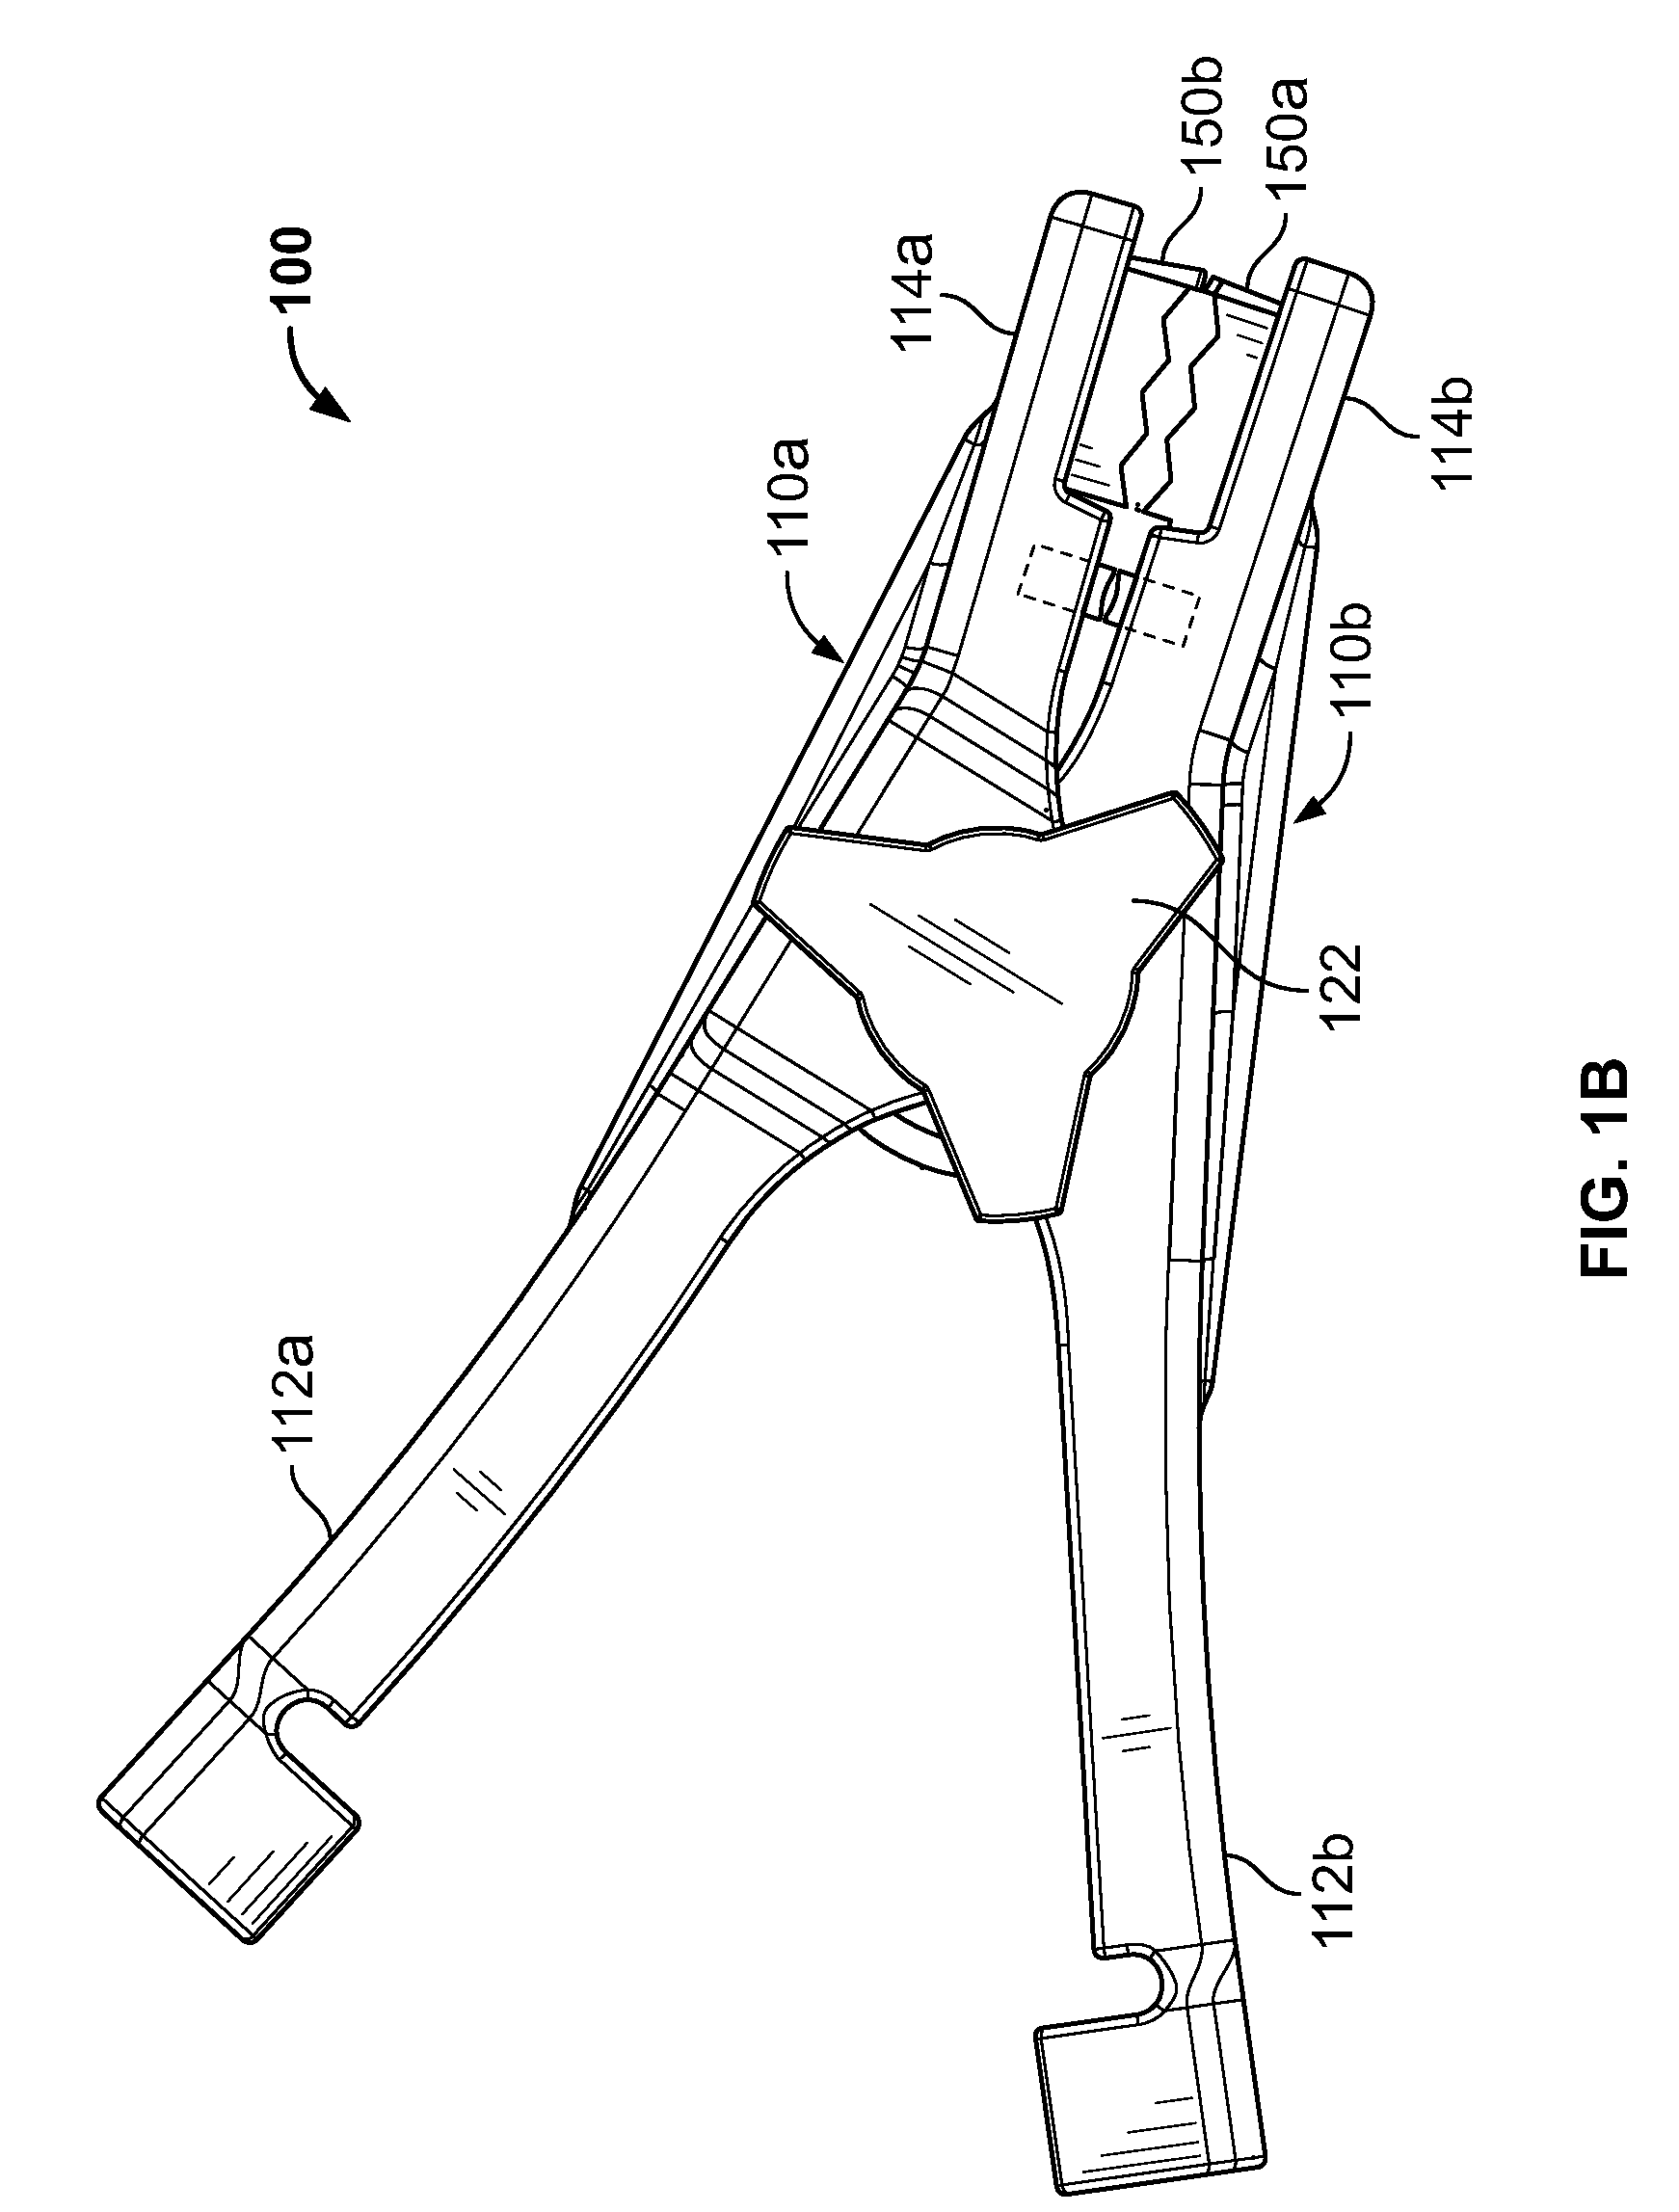 Battery clamp for use with top post and side post batteries and methods for using the same